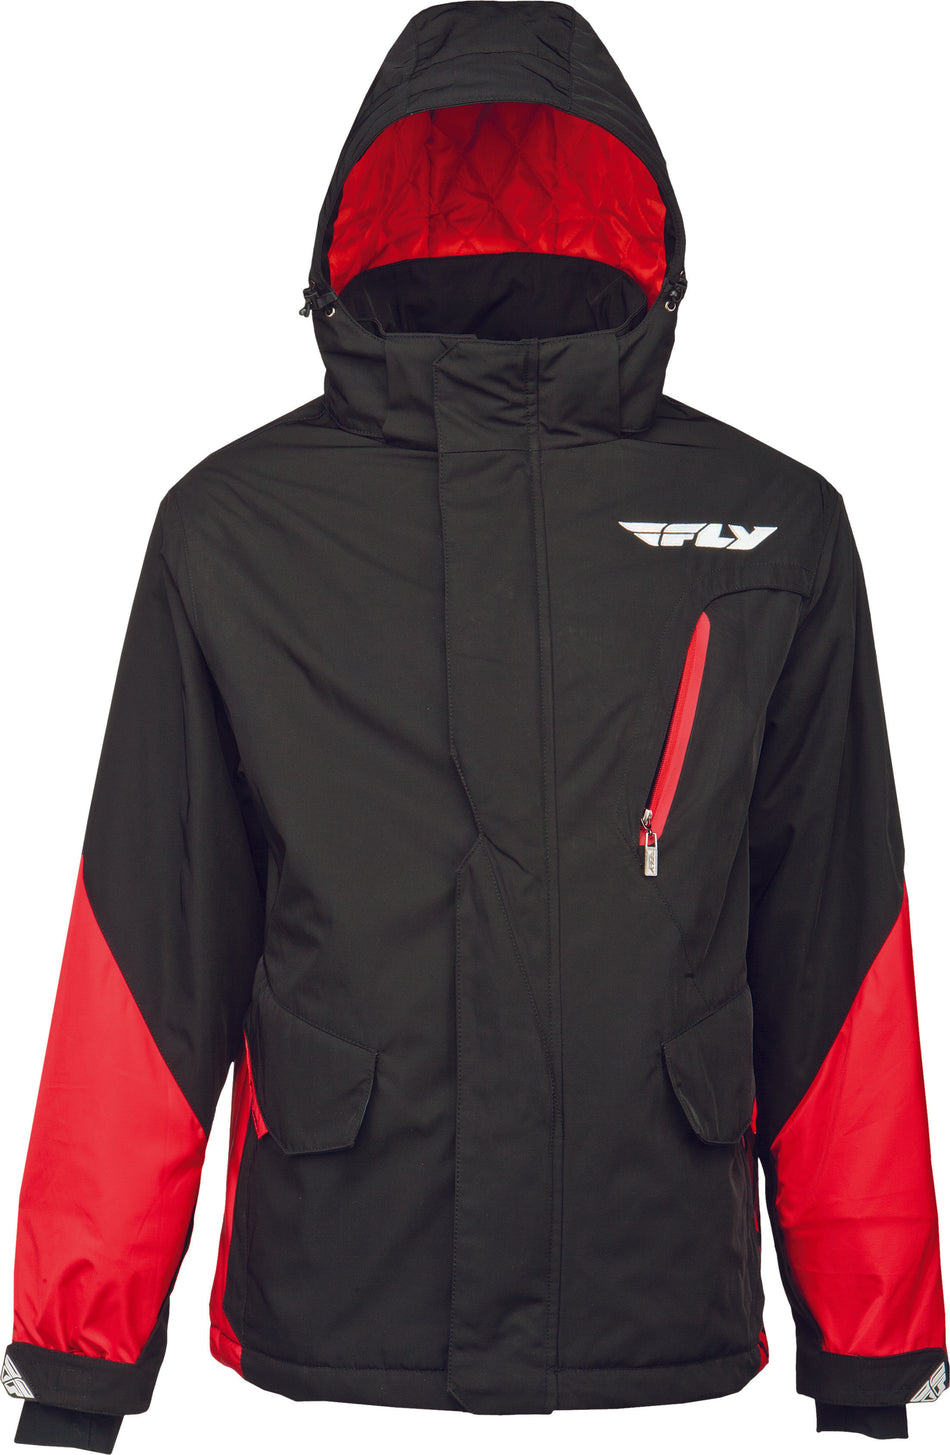 FLY RACING Fly Factory Jacket Red/Black Xl 354-6162X